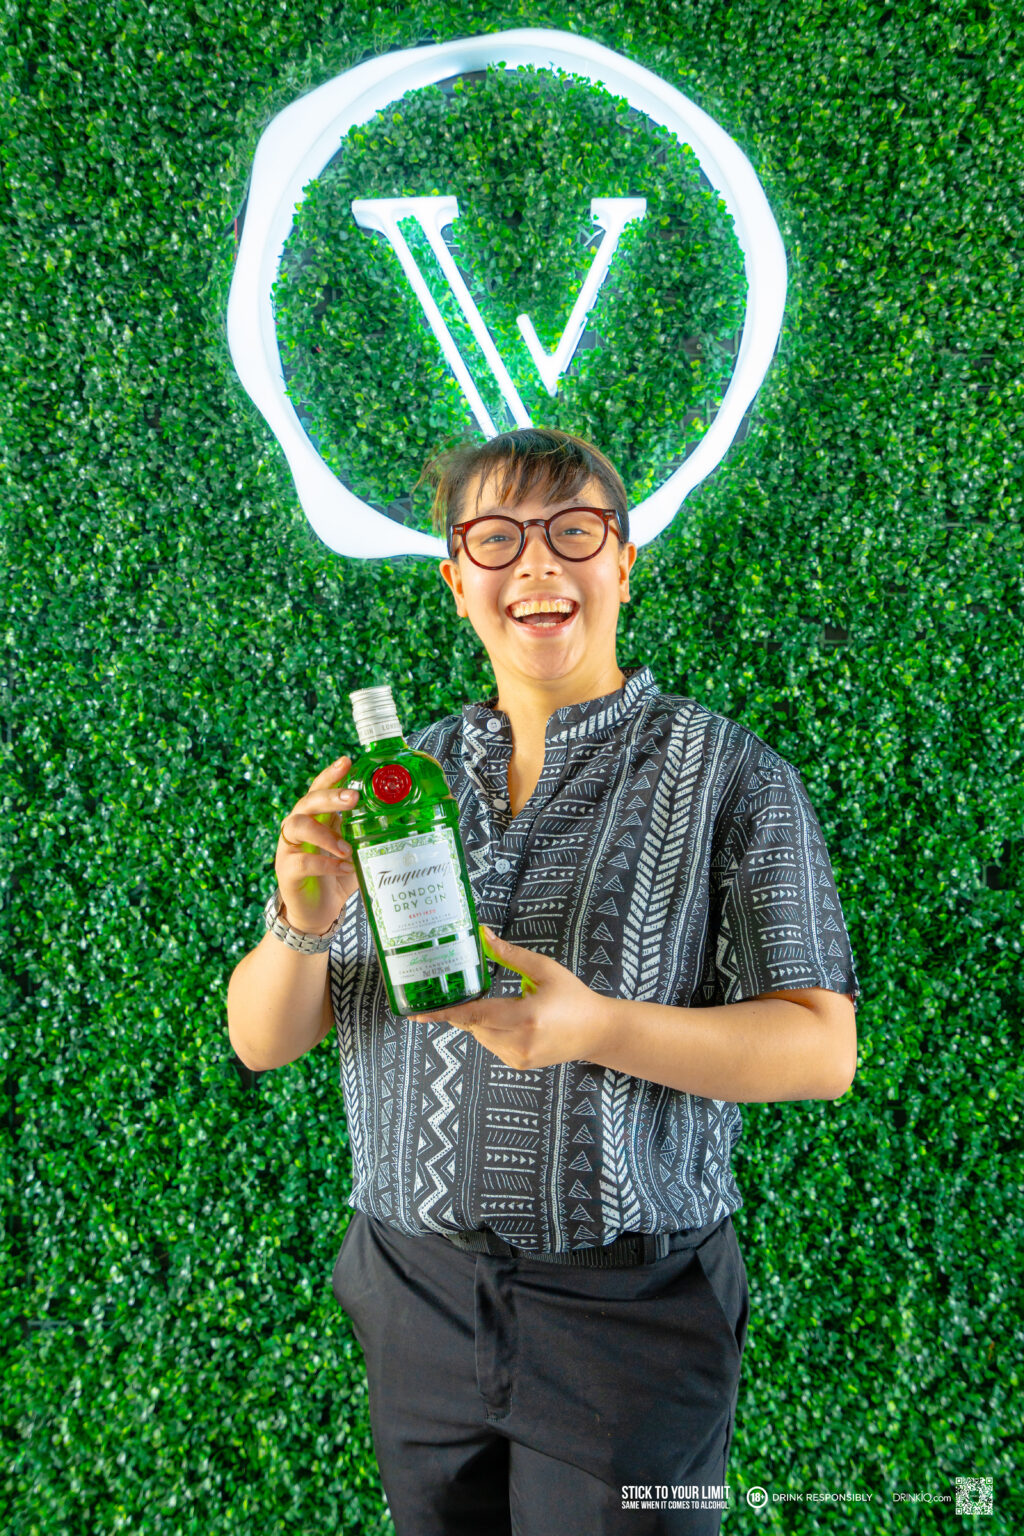 Diageo World-Class bartender, Aly Lorenzo, joins Tanqueray